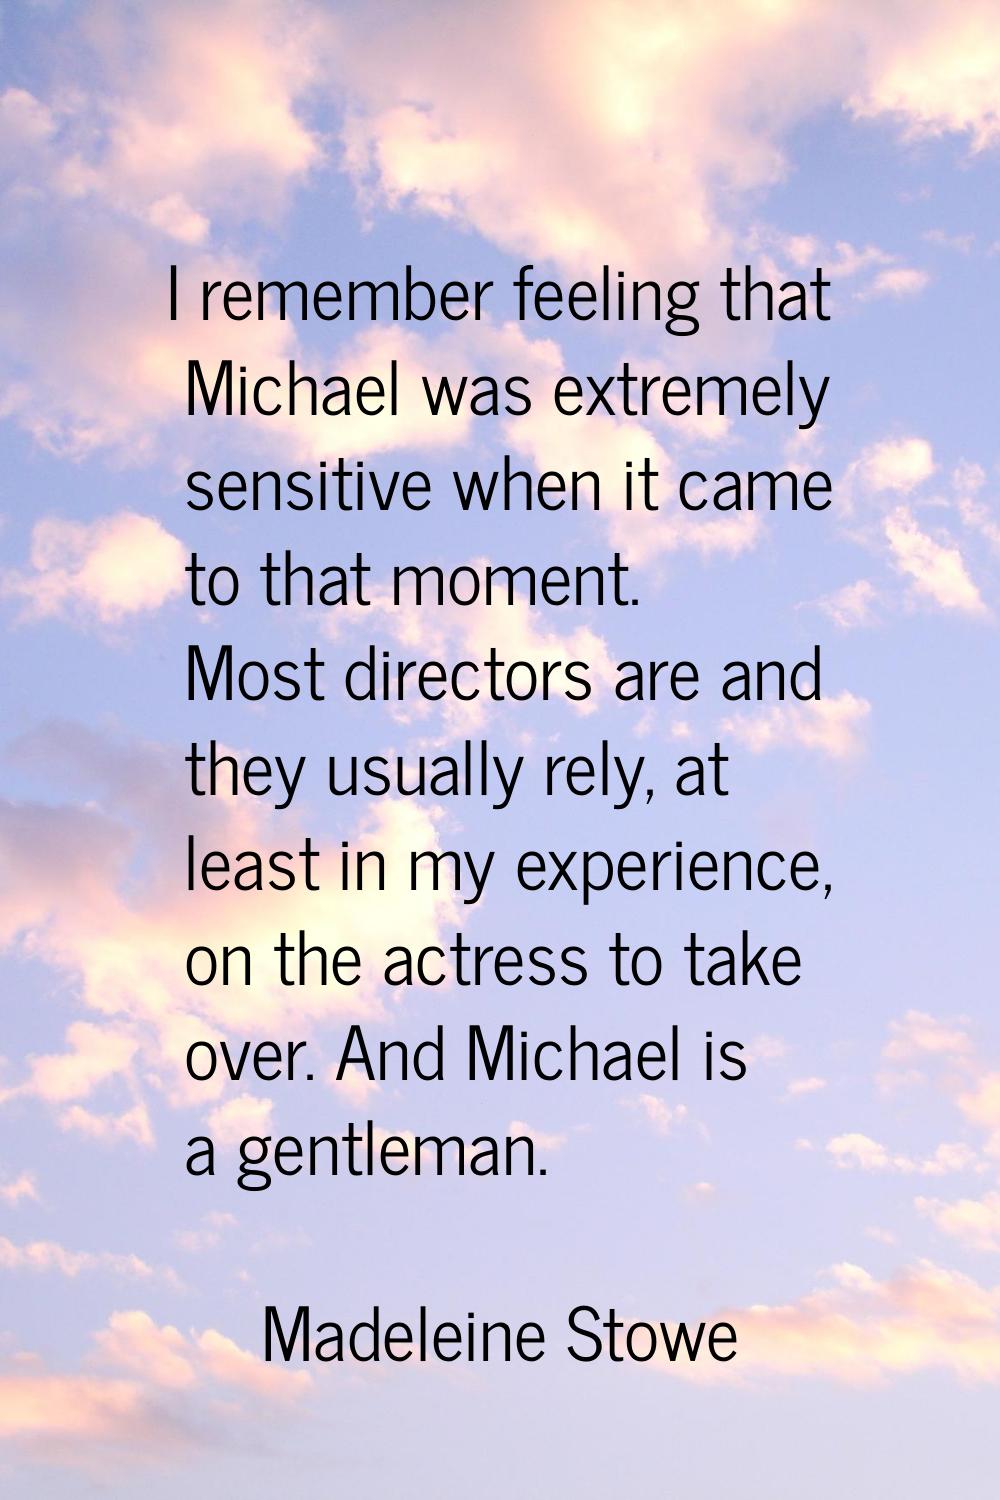 I remember feeling that Michael was extremely sensitive when it came to that moment. Most directors